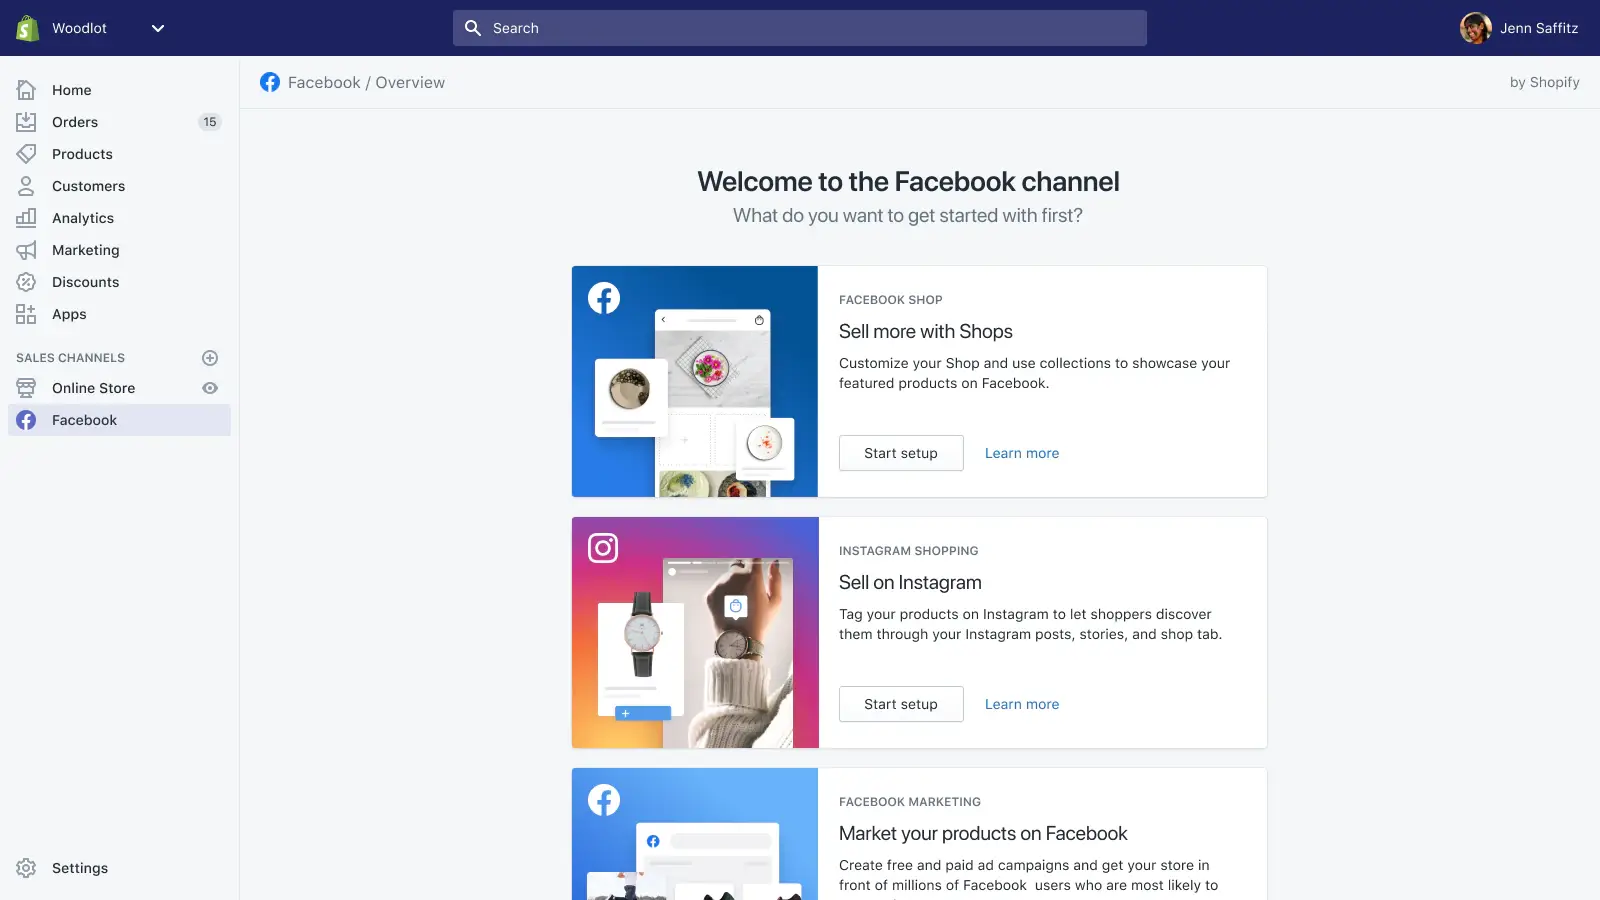 With Facebook's Shopify Integration, it becomes easier than ever to connect your Facebook marketplace with Shopify store